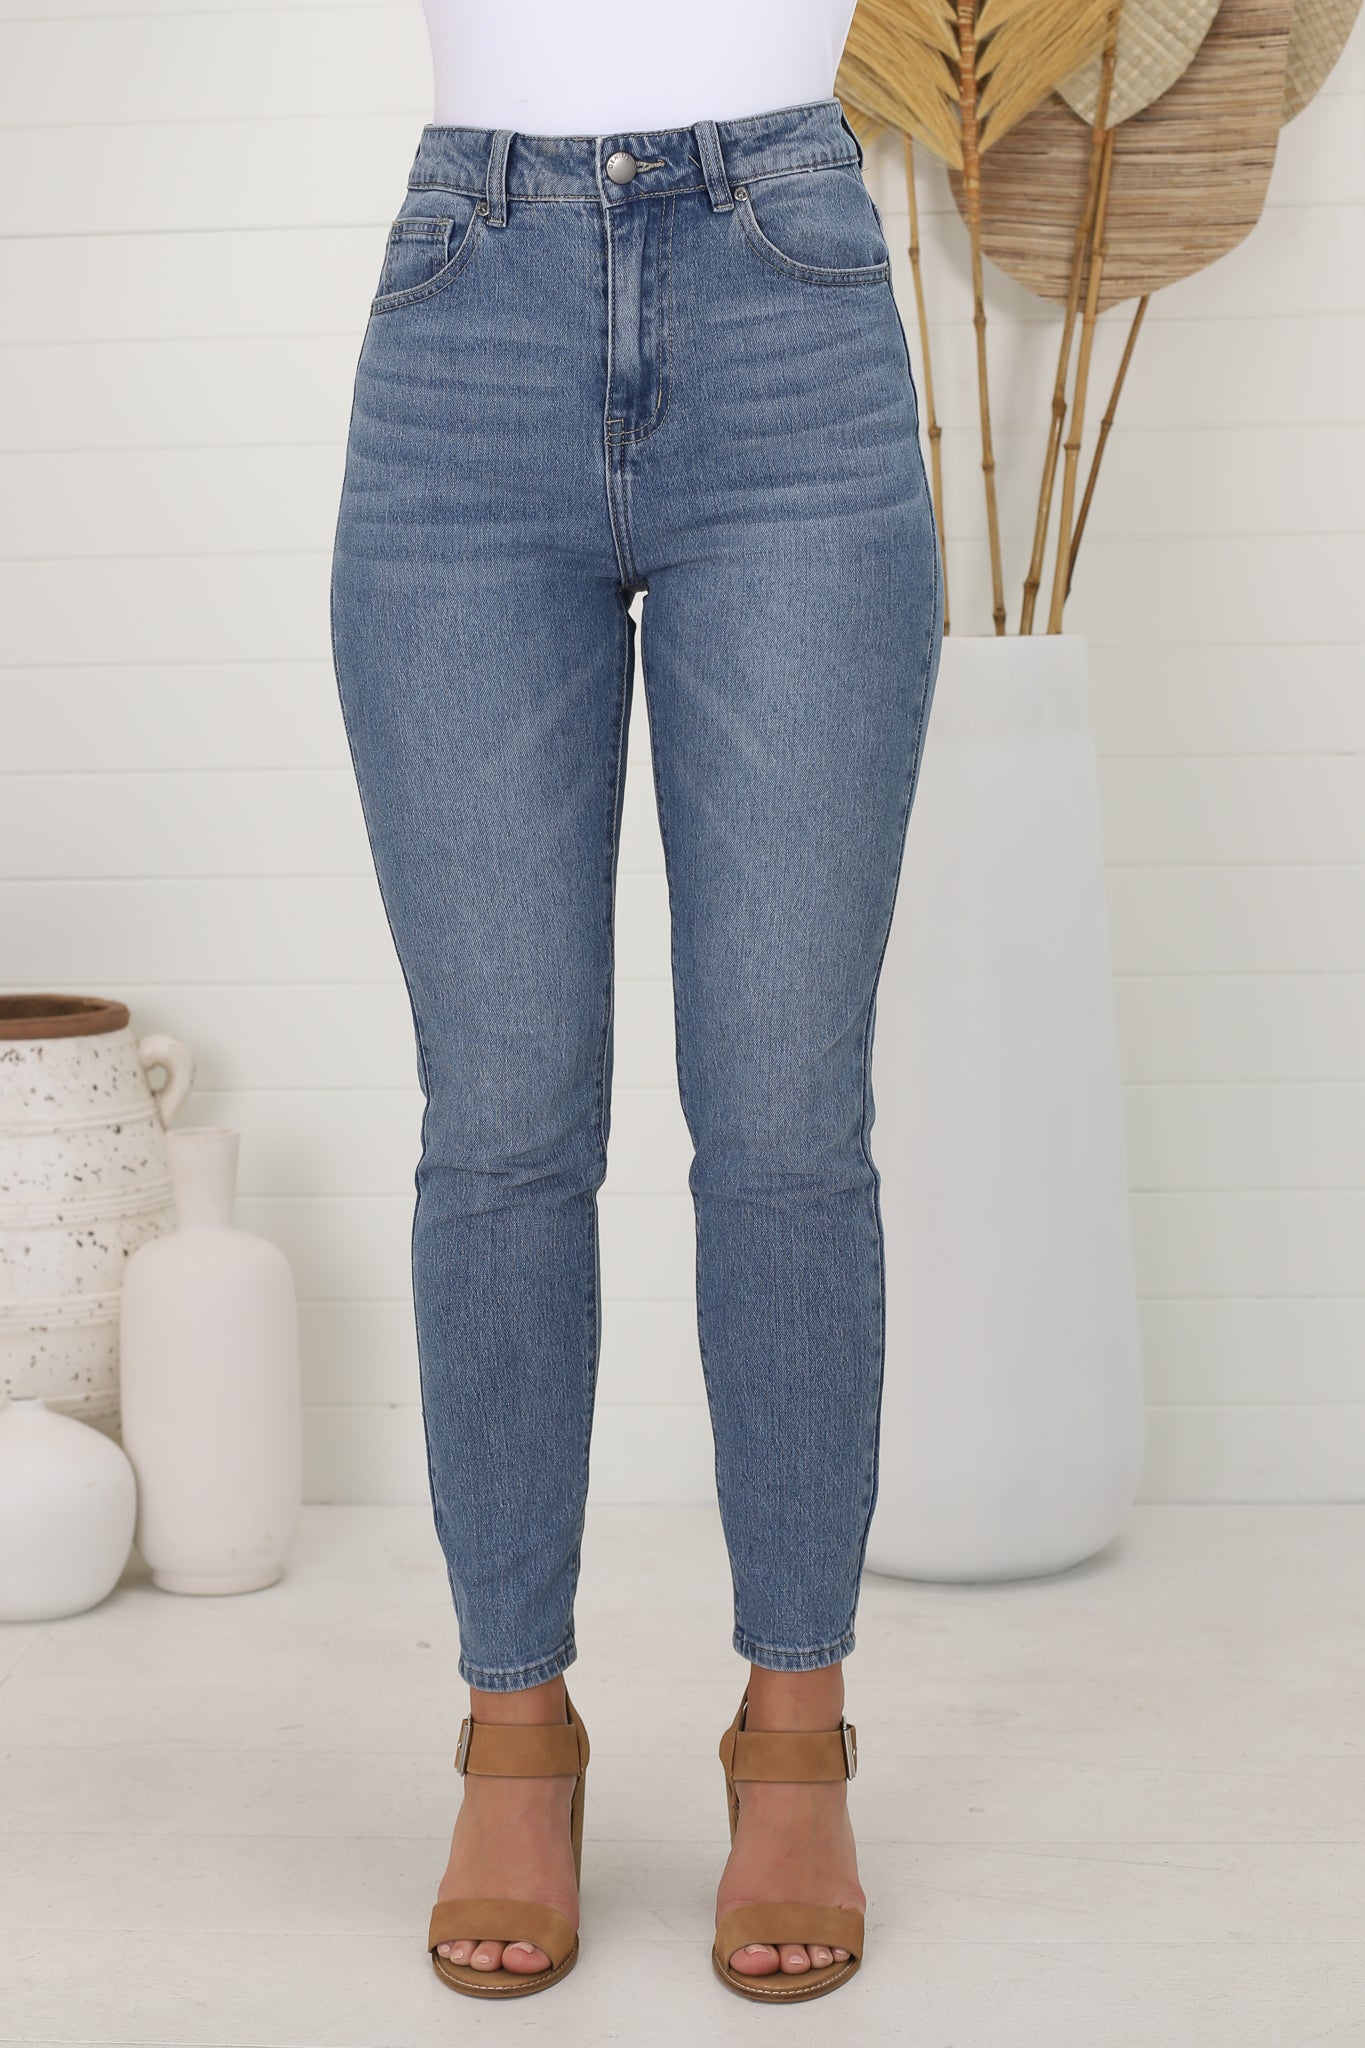 Ziggy Jeans - High Waisted Whiskers Detailed Jeans in Mid Wash Blue